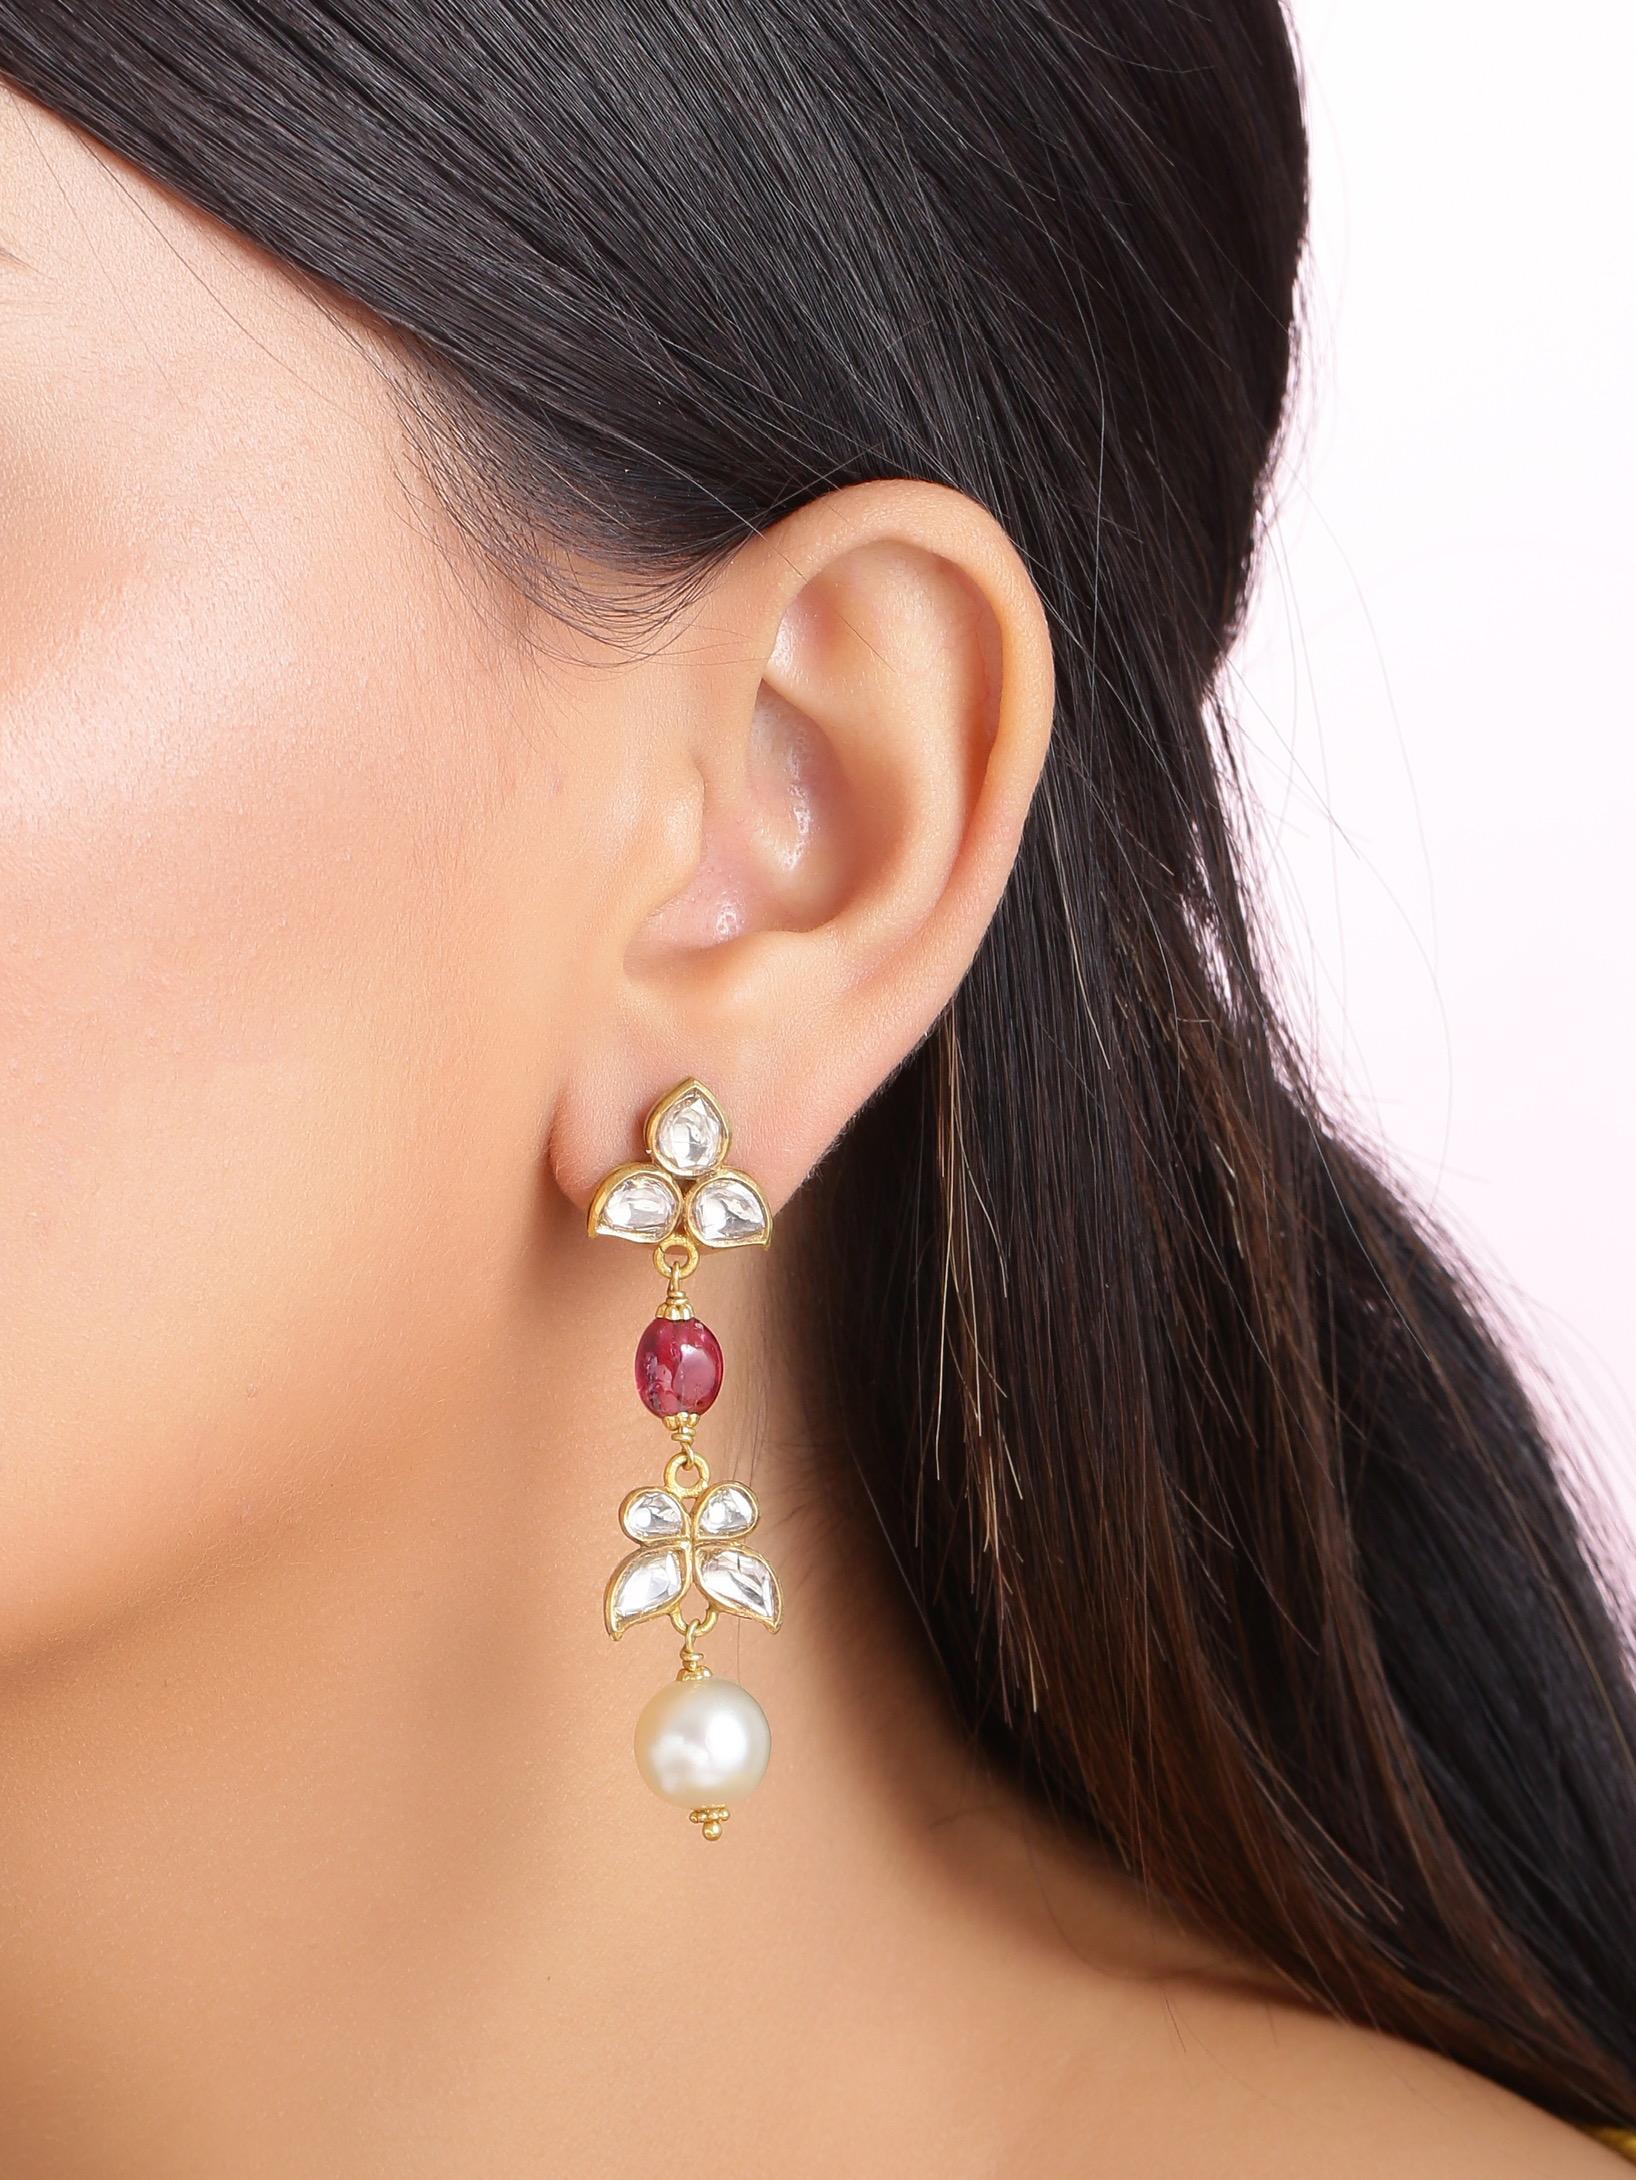 Women's Diamond and Tourmaline earring pair handcrafted in 18K Gold with fine enamel For Sale